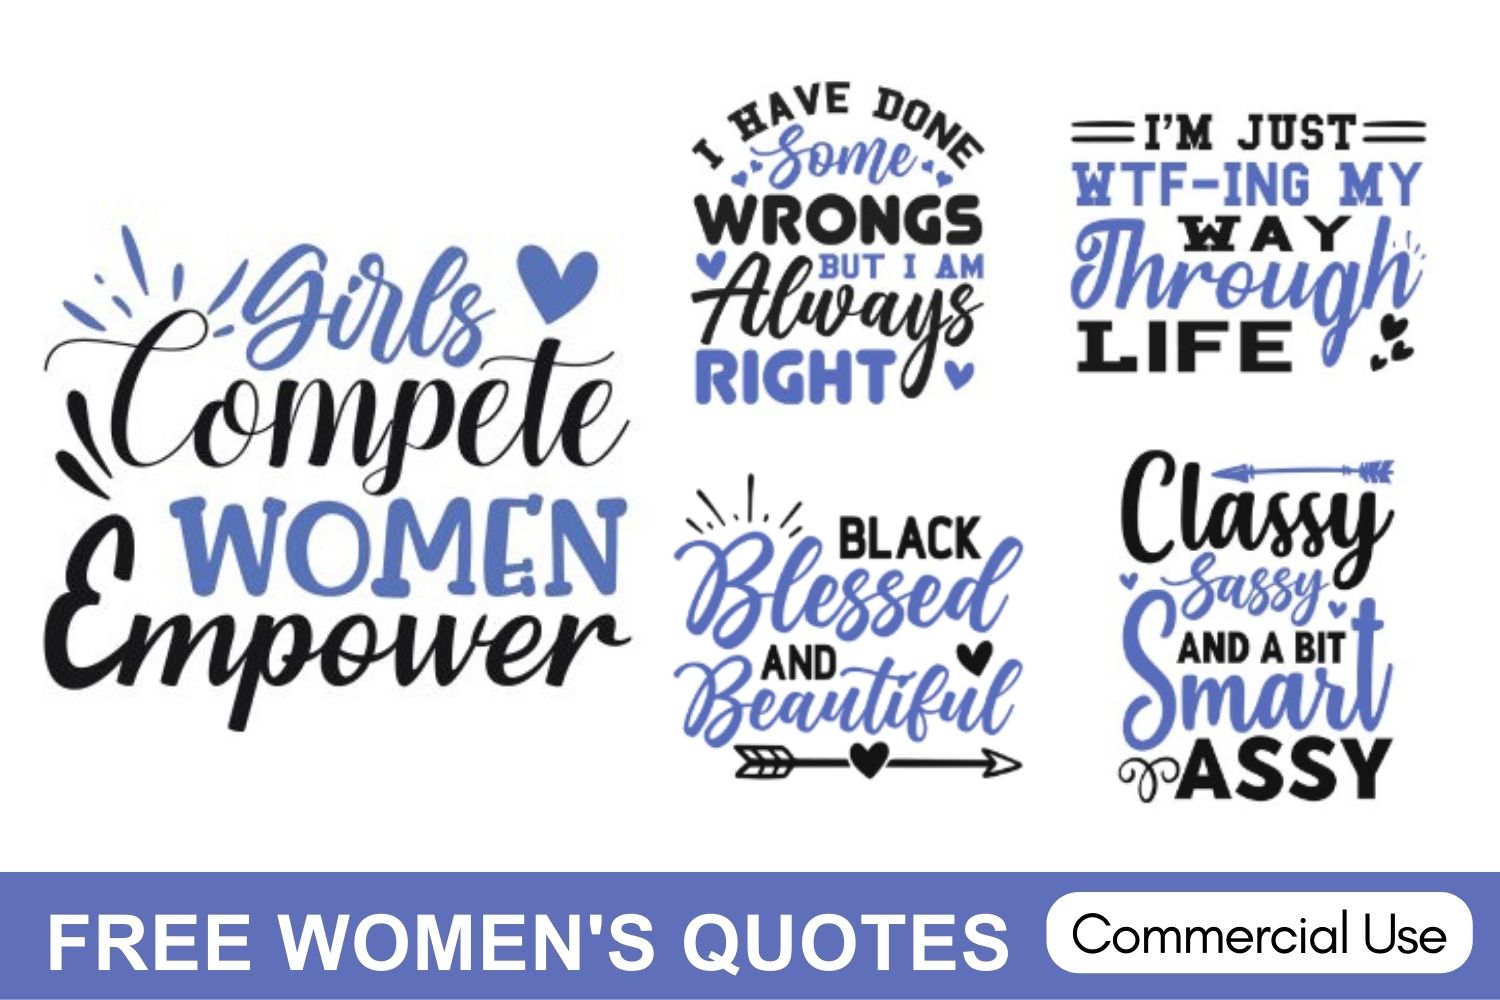 Women's Sayings and Quotes SVG download free cricut silhouette laser cut layered clipart vector